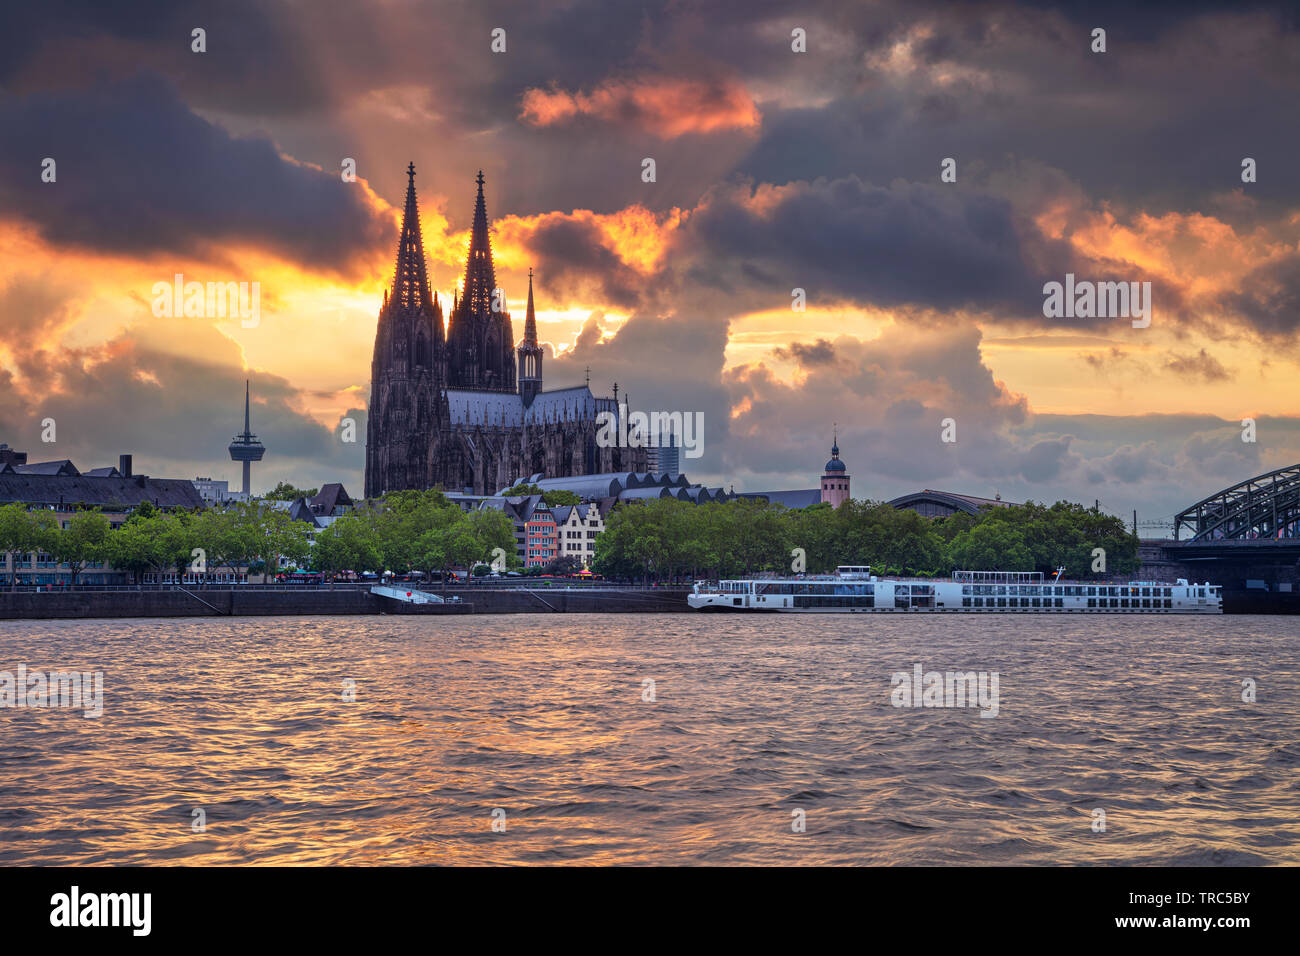 the Louis Vuitton Store at the Blau-Gold-House near the cathedral, Cologne,  Germany. der Louis Vuitton Store im Blau-Gold-Haus an der Domplatte, Koel  Stock Photo - Alamy